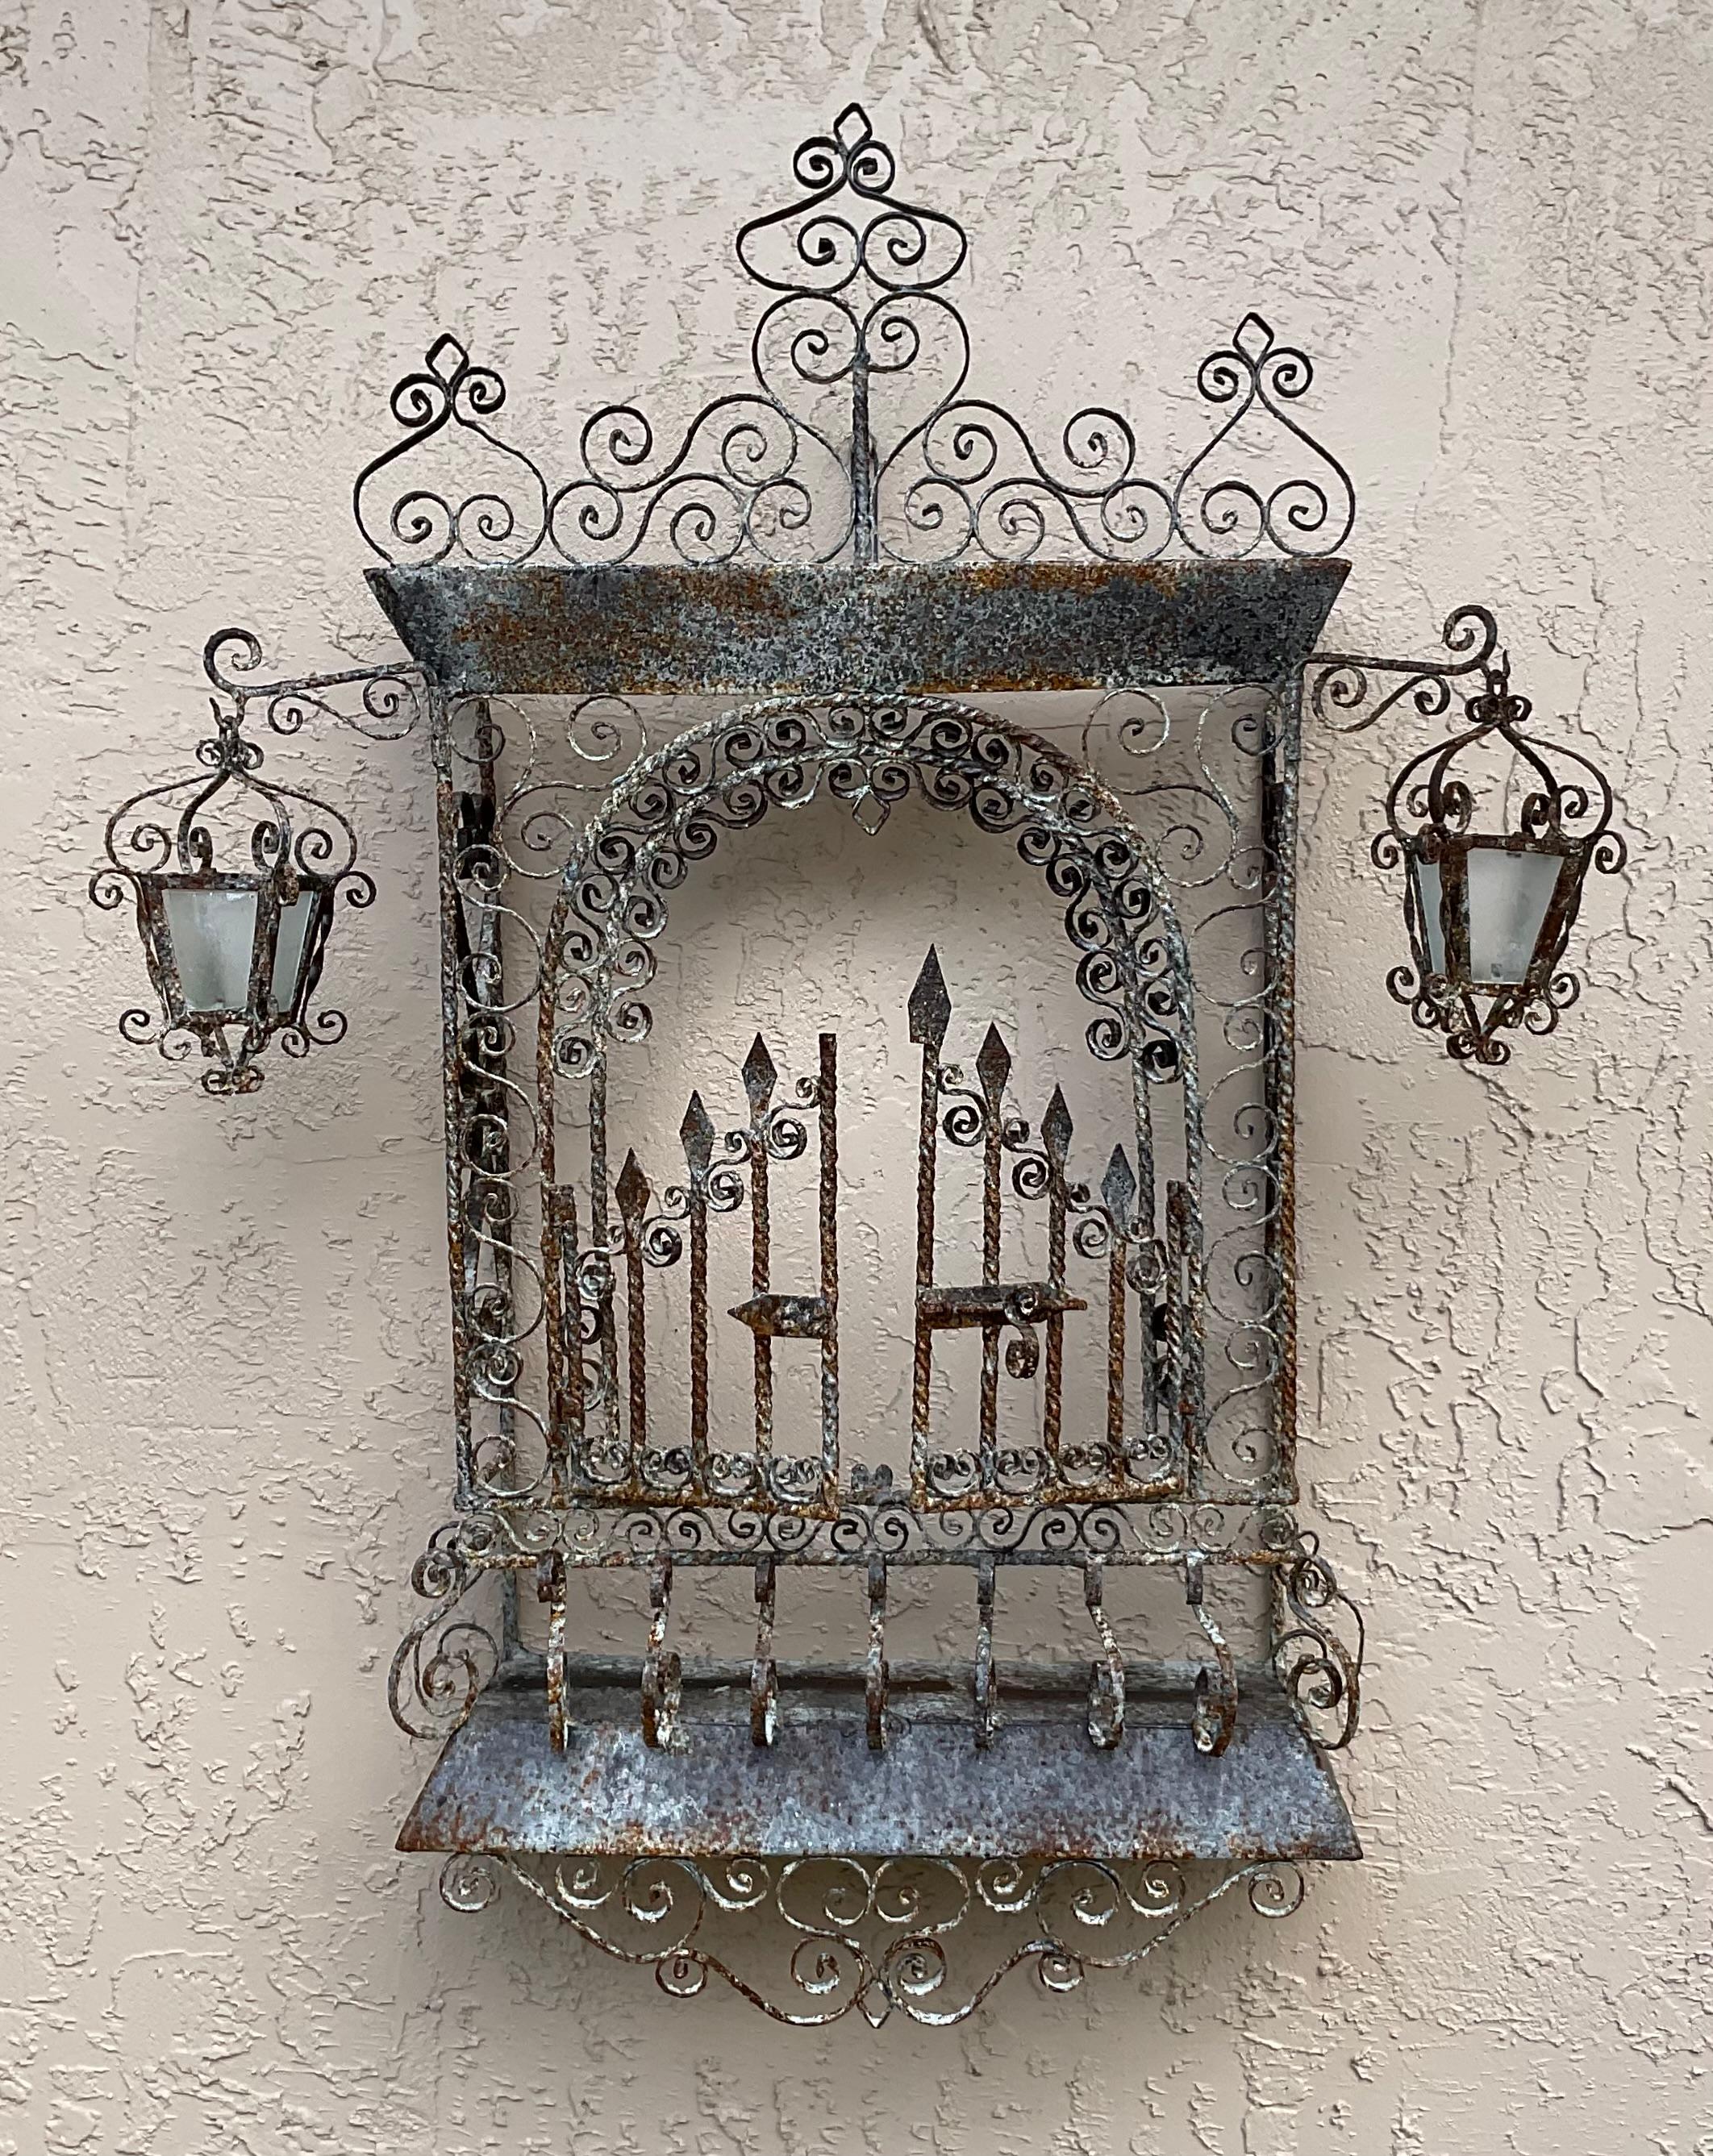 Vintage Wall Hanging Palm Beach Wrought Iron Gate Mizner Style For Sale 3